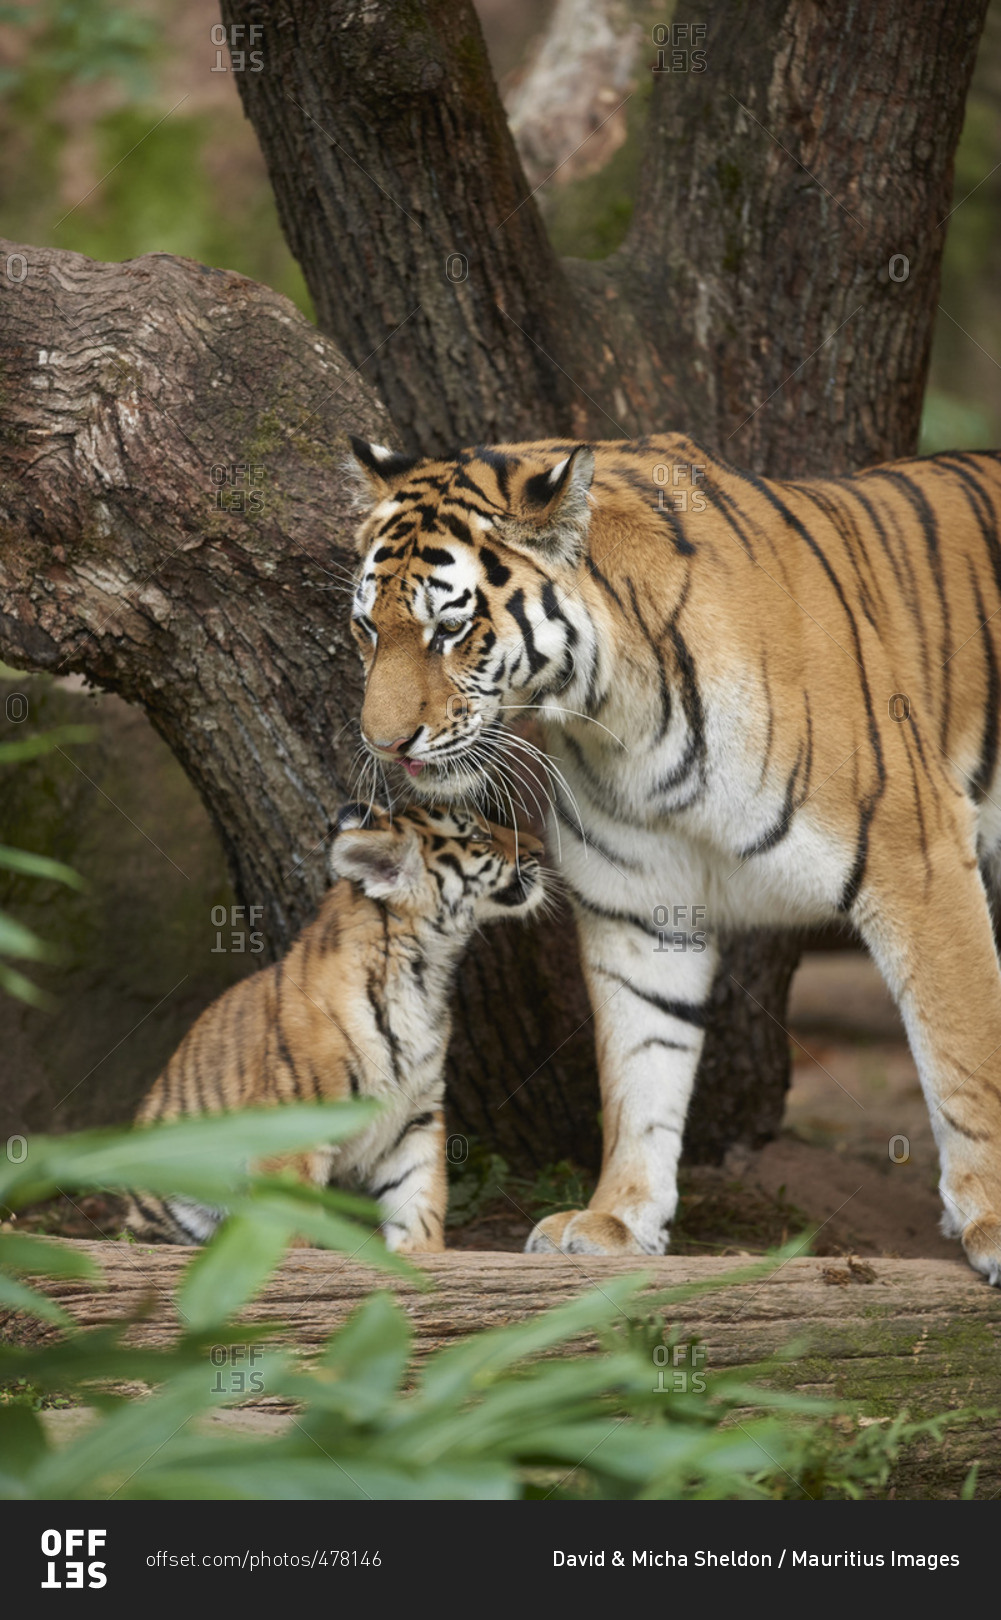 File:Siberian Tiger Mom with Cub (30547501491).jpg - Wikimedia Commons